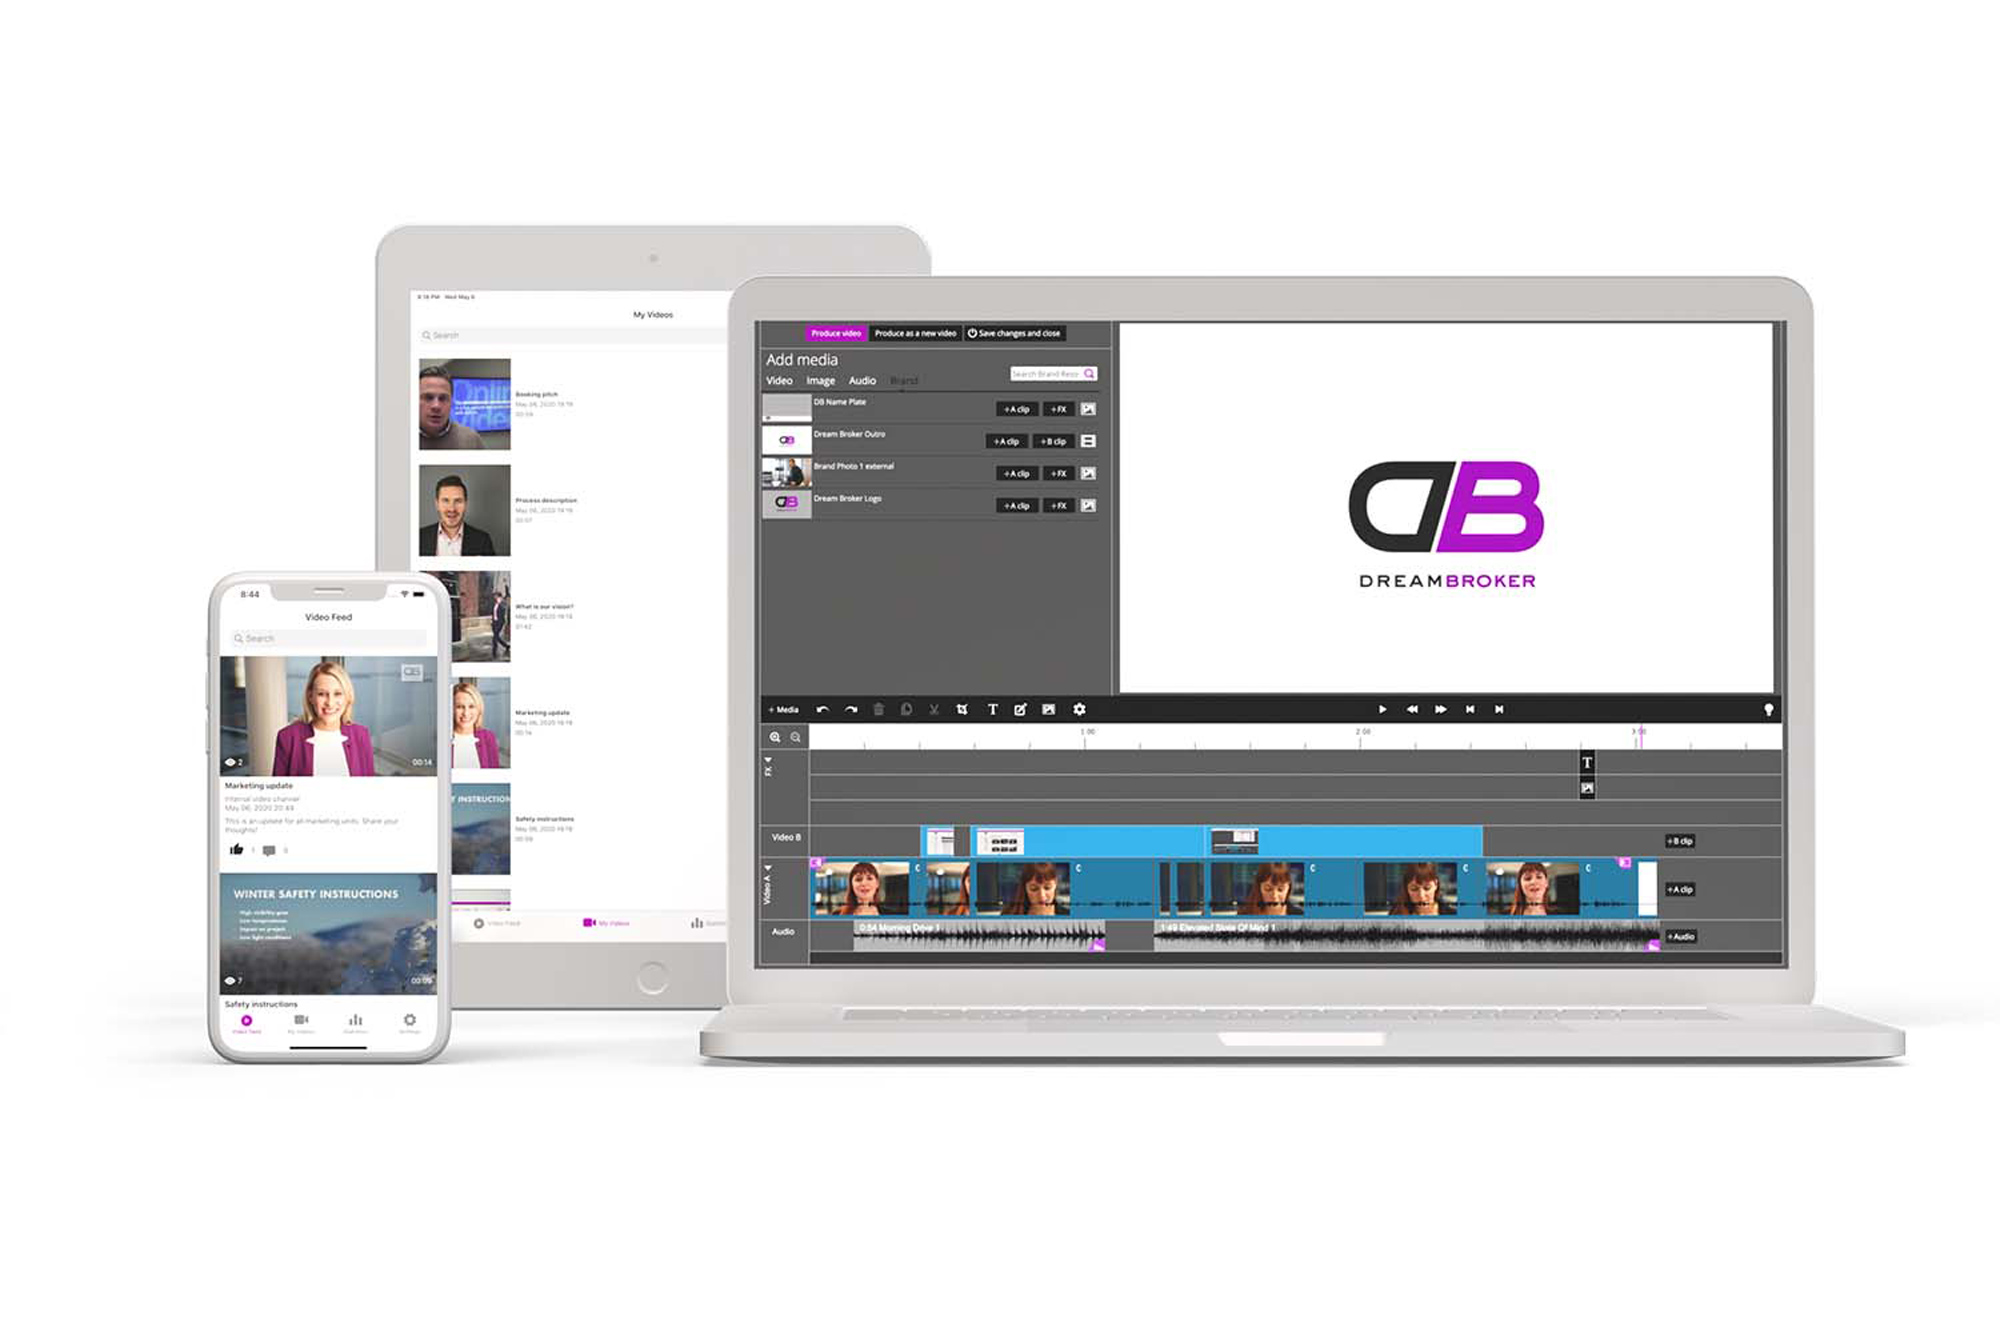 Designed for end-to-end workflows, the private cloud-based software enables every employee to easily create, edit, manage, share and analyse online videos, both on desktop and mobile devices.